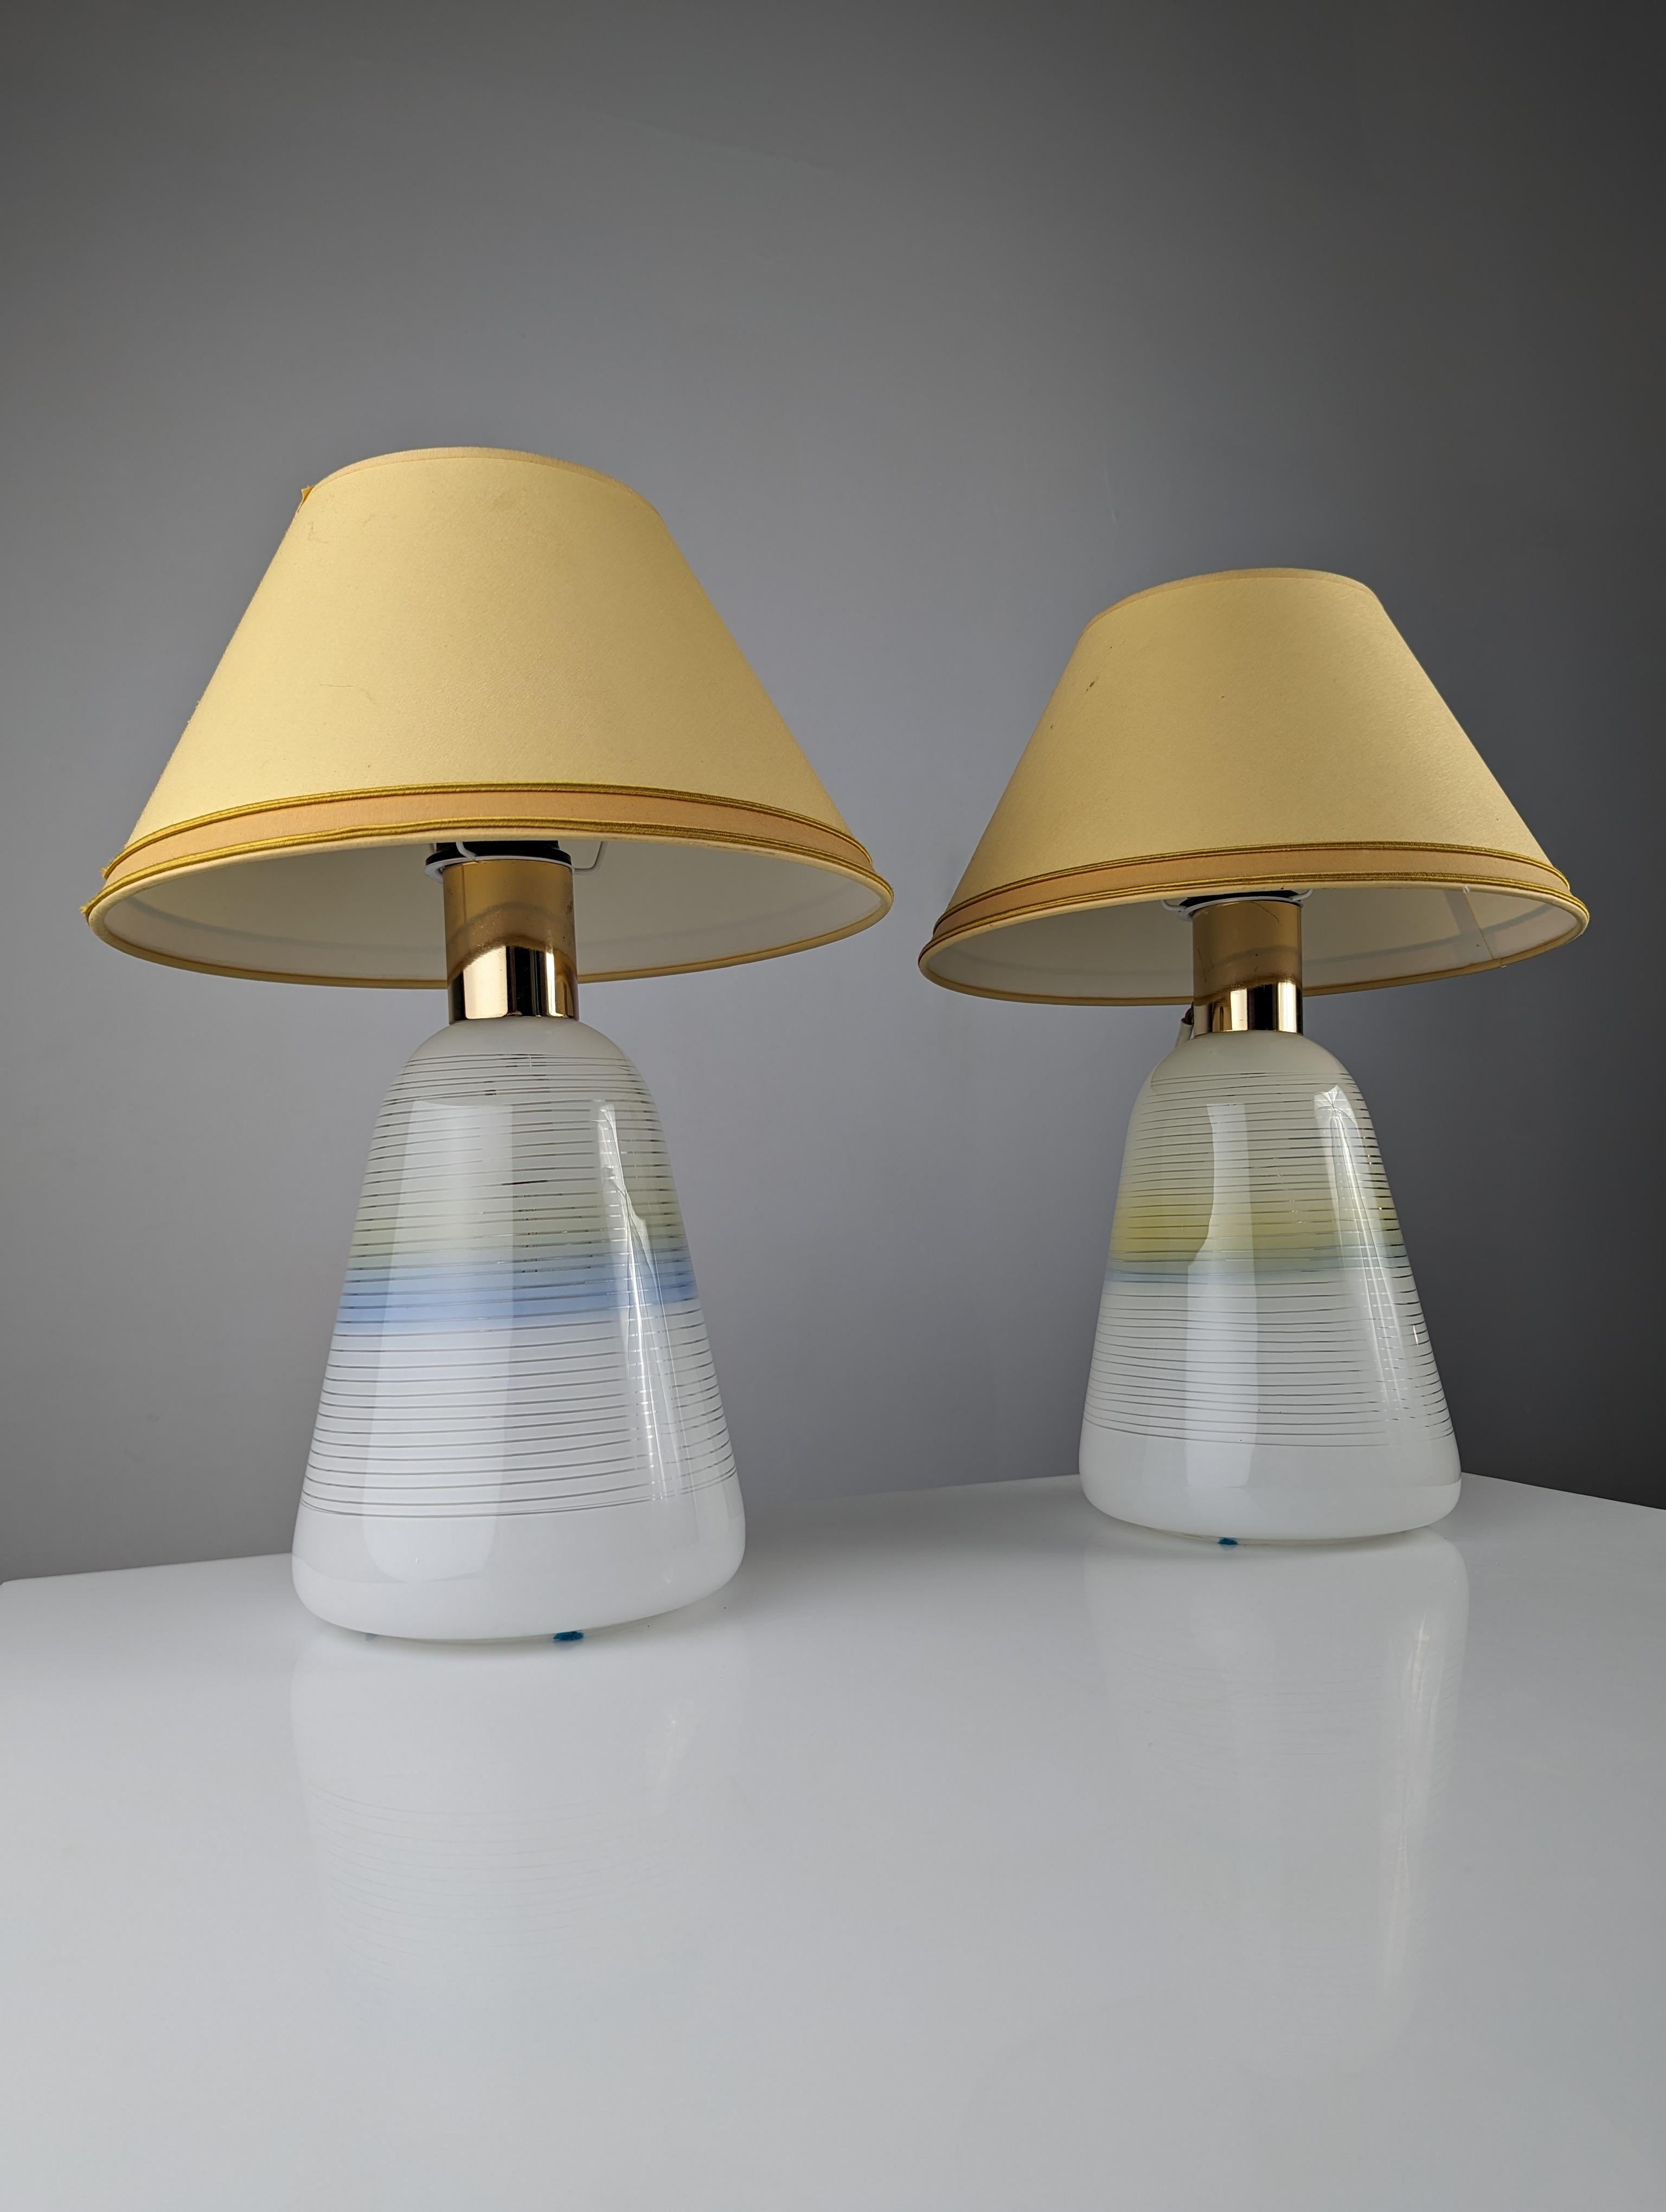 Beautiful pair of lamps with internal and external lighting made of elegant Italian glass with fine horizontal lines and central diffused color. Get functional and elegant light with this pair of vintage lamps from the 70s.

Dimensions: 42 high x 30